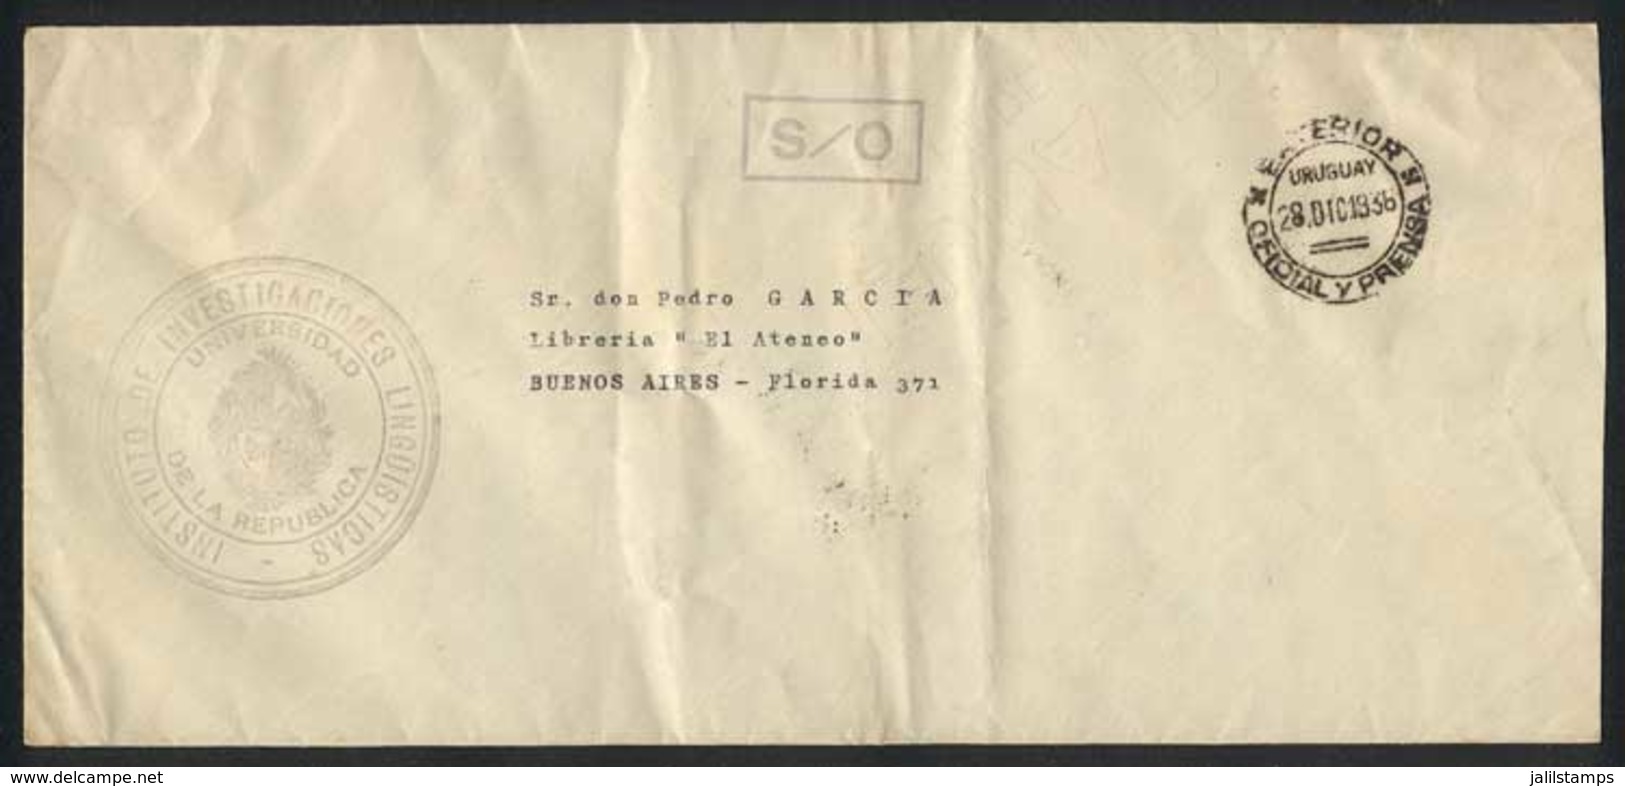 URUGUAY: Cover Of The Institute Of Linguistics Sent Stampless To Buenos Aires On 28/DE/1936, Datestamped "EXTERIOR - OFI - Uruguay